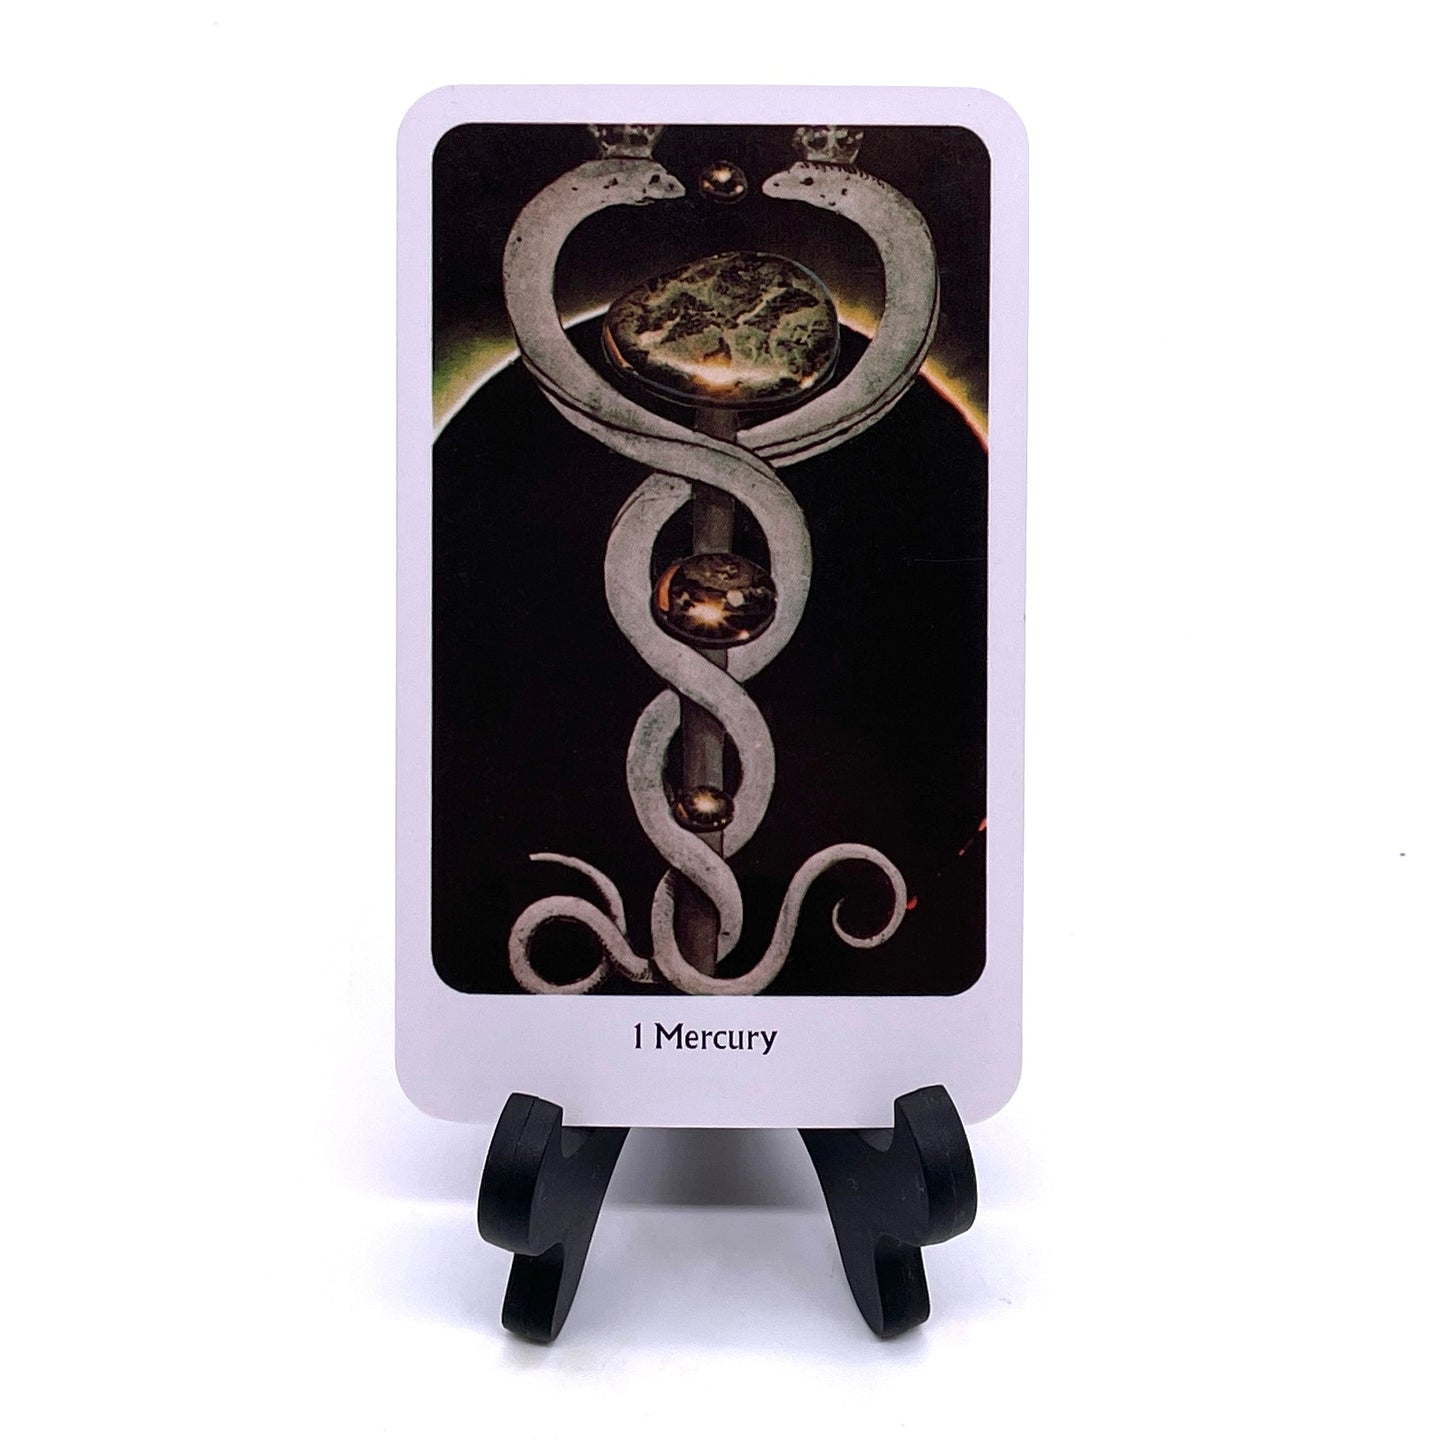 Photo of Card #1 "Mercury", featuring collaged images of two serpents facing each other and wrapped symmetrically around a scepter in front of a solar eclipse background.